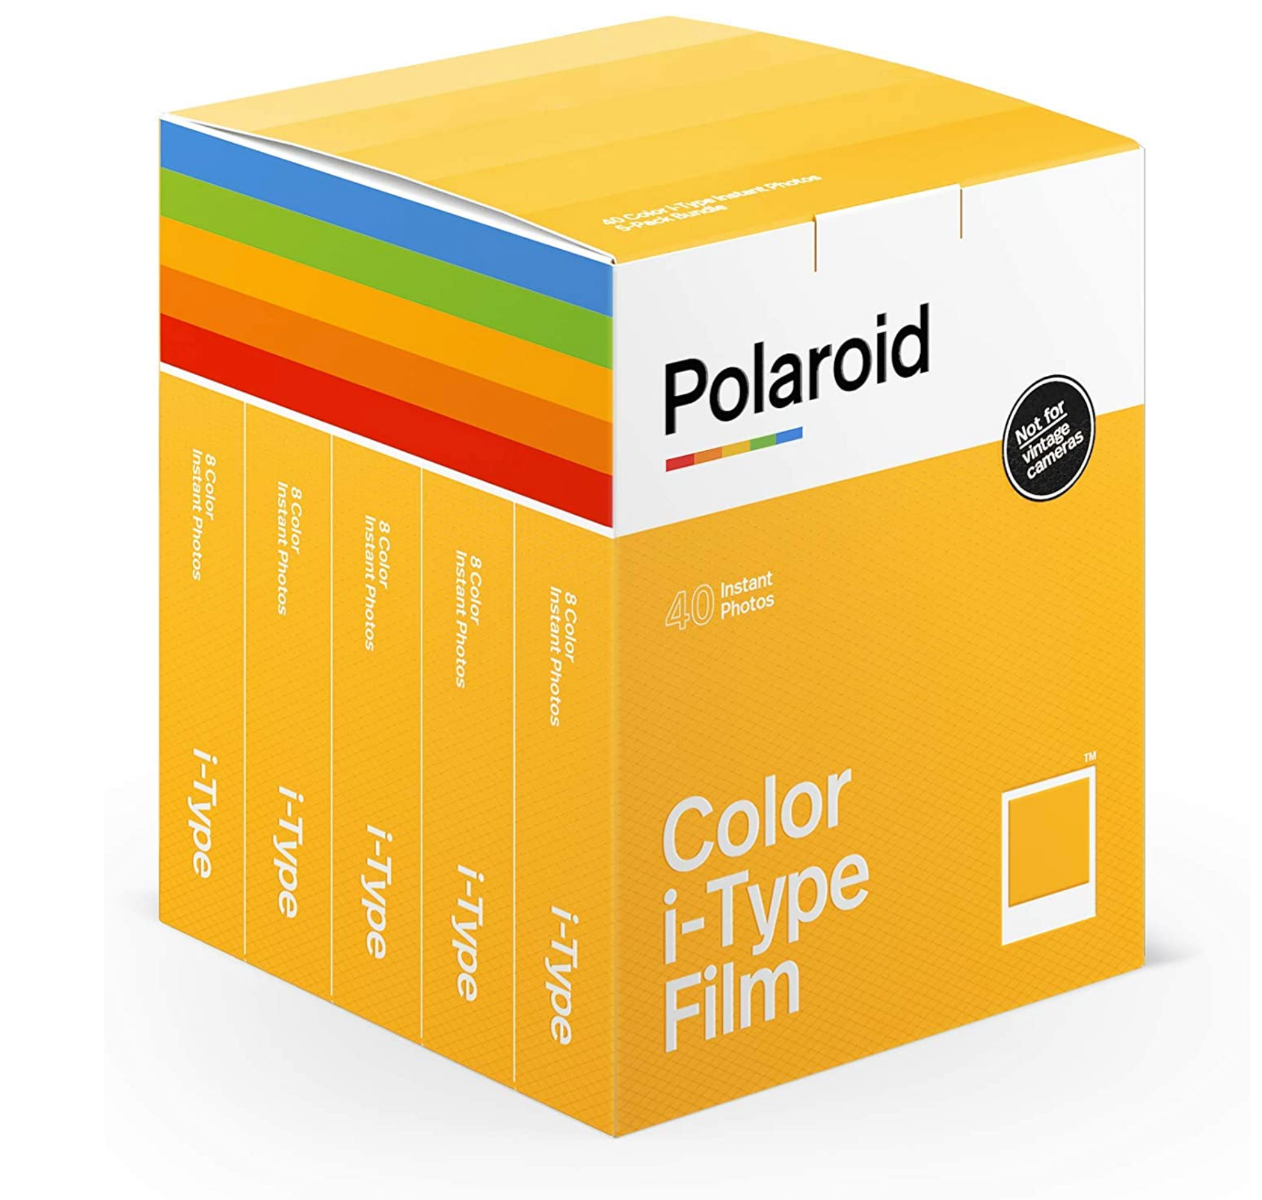 Polaroid 600 film 2 pack 1 color, 1 B&W 16 photos in all also for i-type  cameras